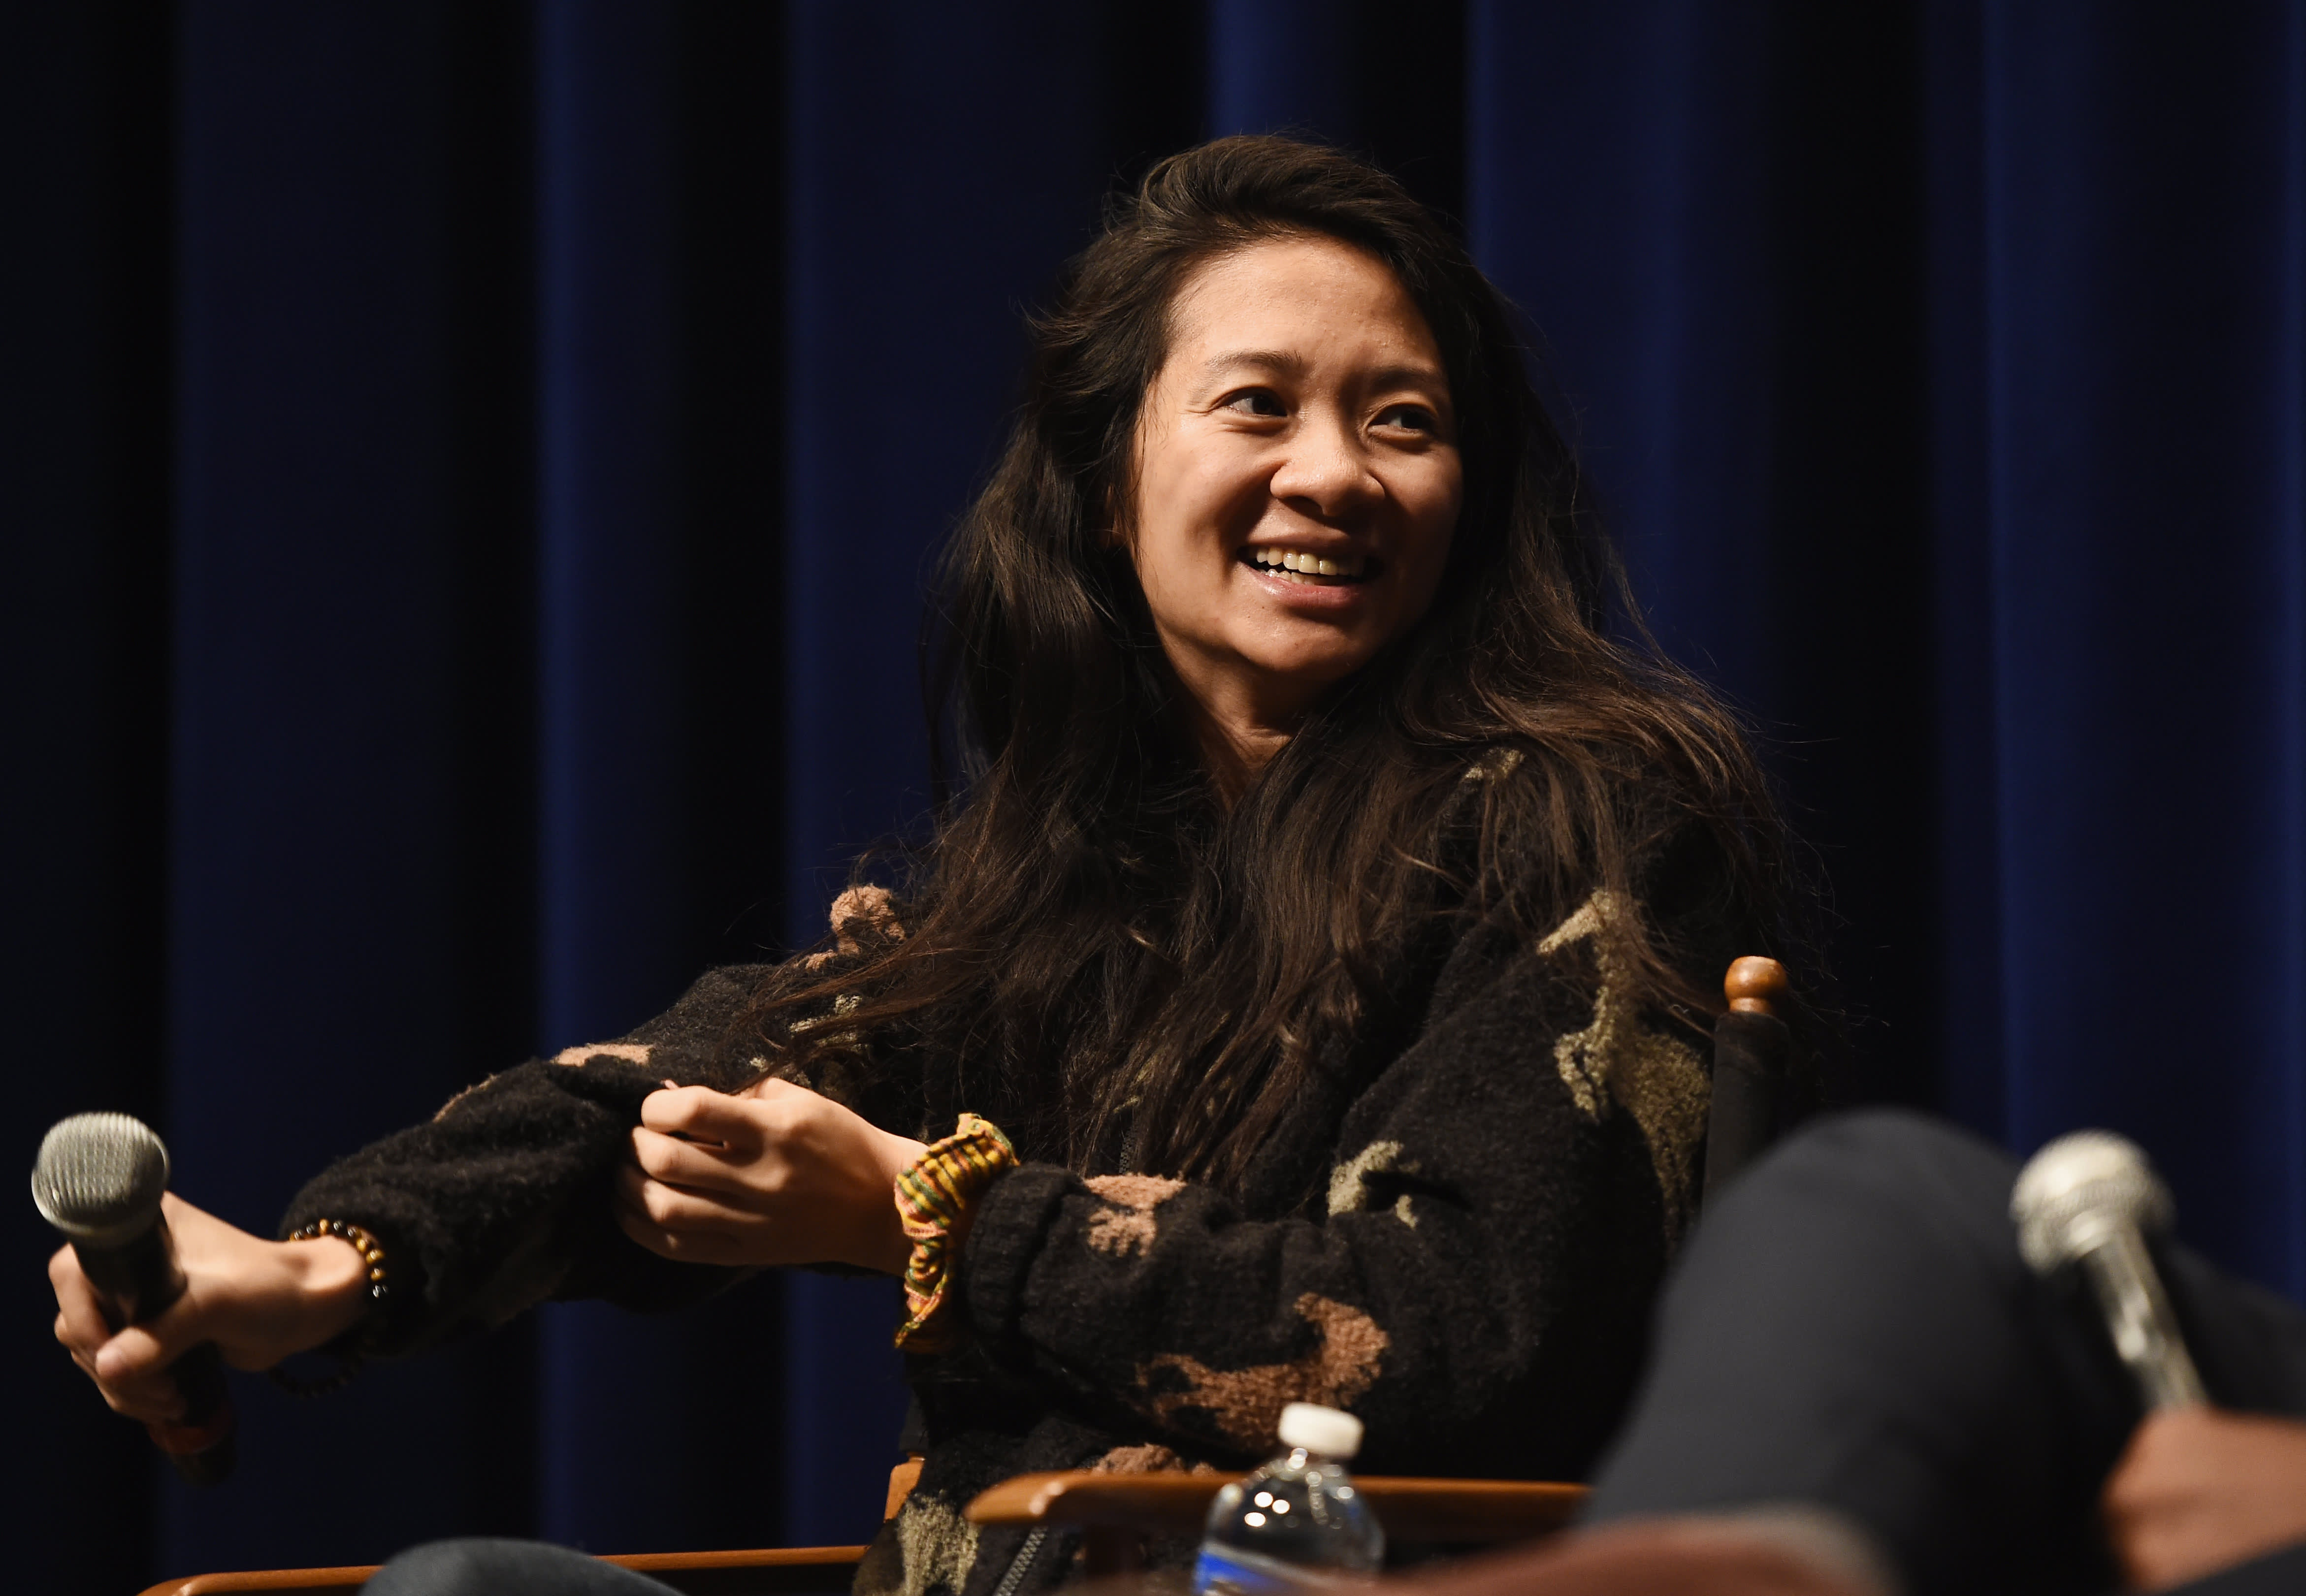 Chloe Zhao, second woman to win the Golden Globe for best director, for success